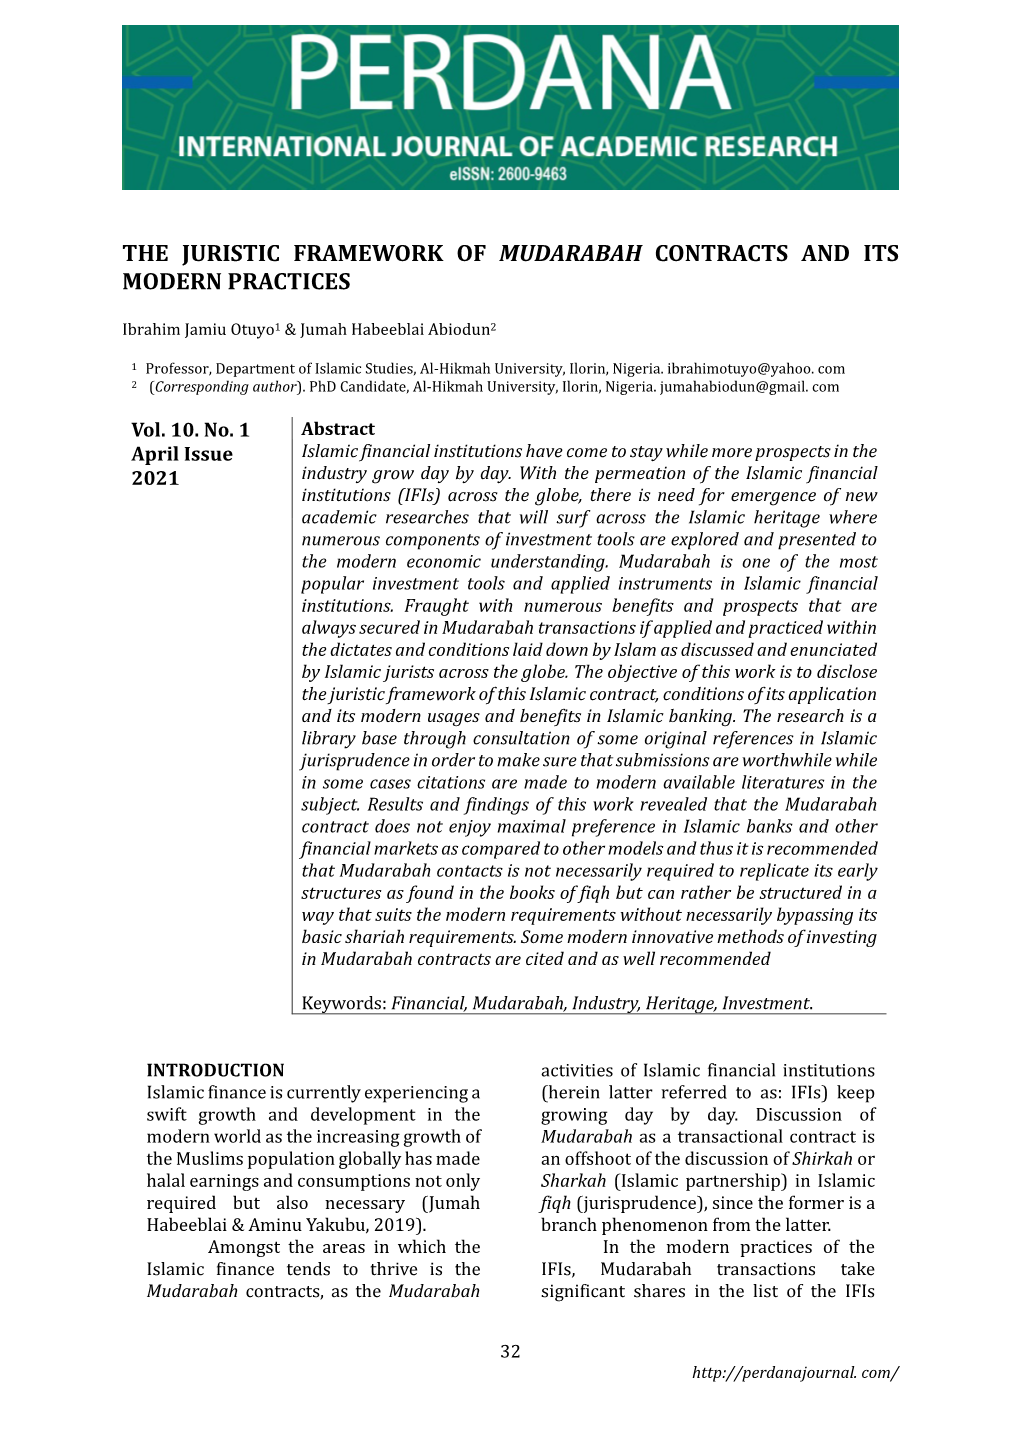 The Juristic Framework of Mudarabah Contracts and Its Modern Practices